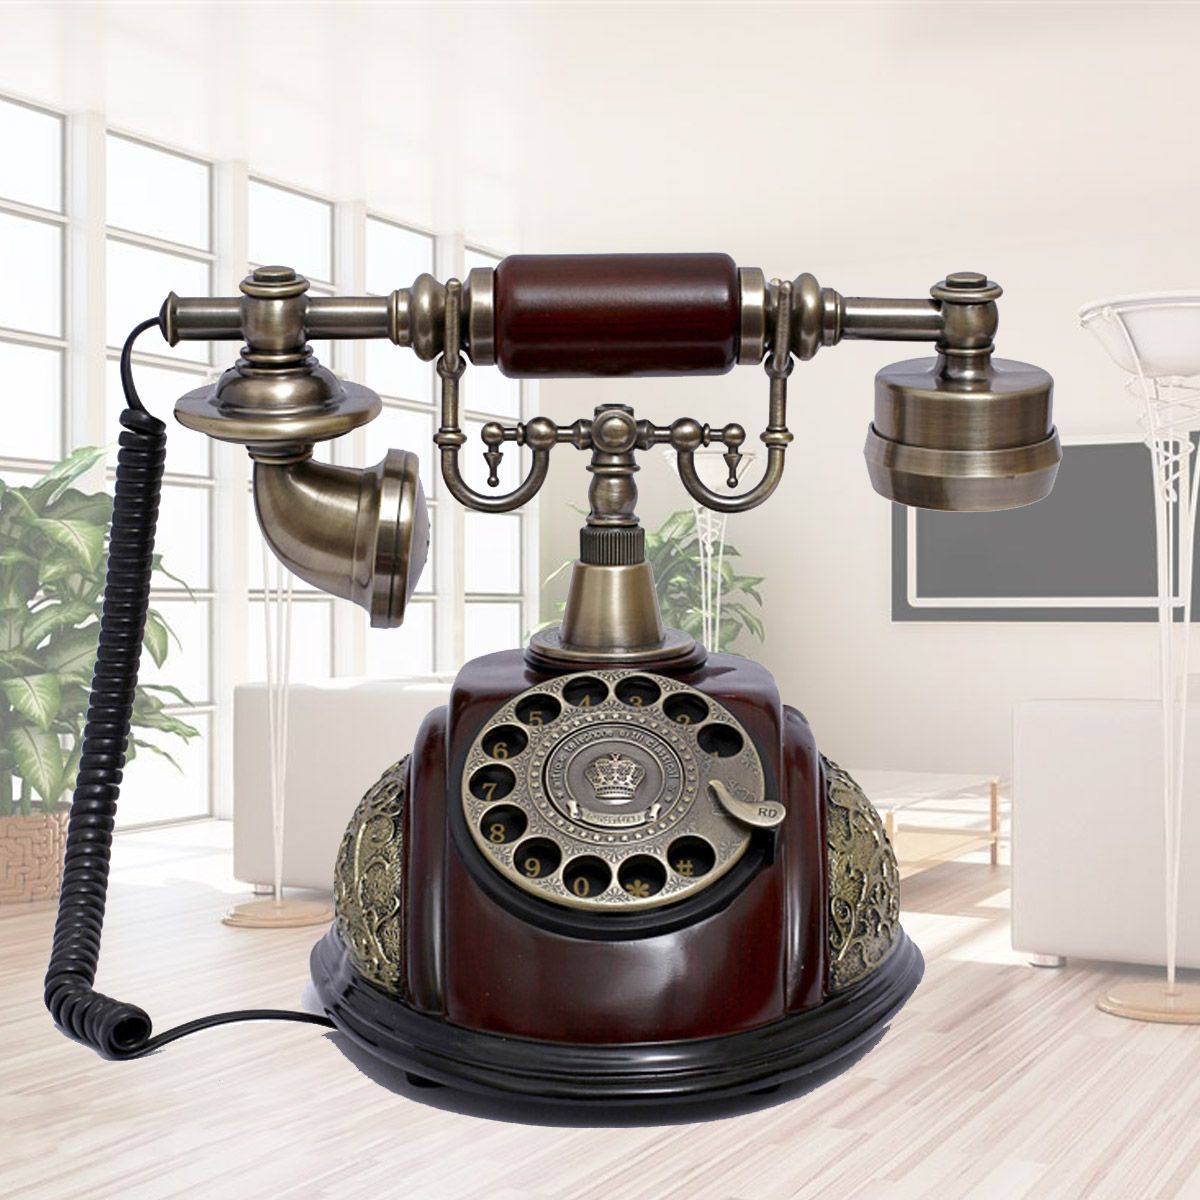 Vintage-Antique-Style-Rotary-Phone-Fashioned-Retro-Handset-Old-Telephone-Home-Office-Decor-1364847